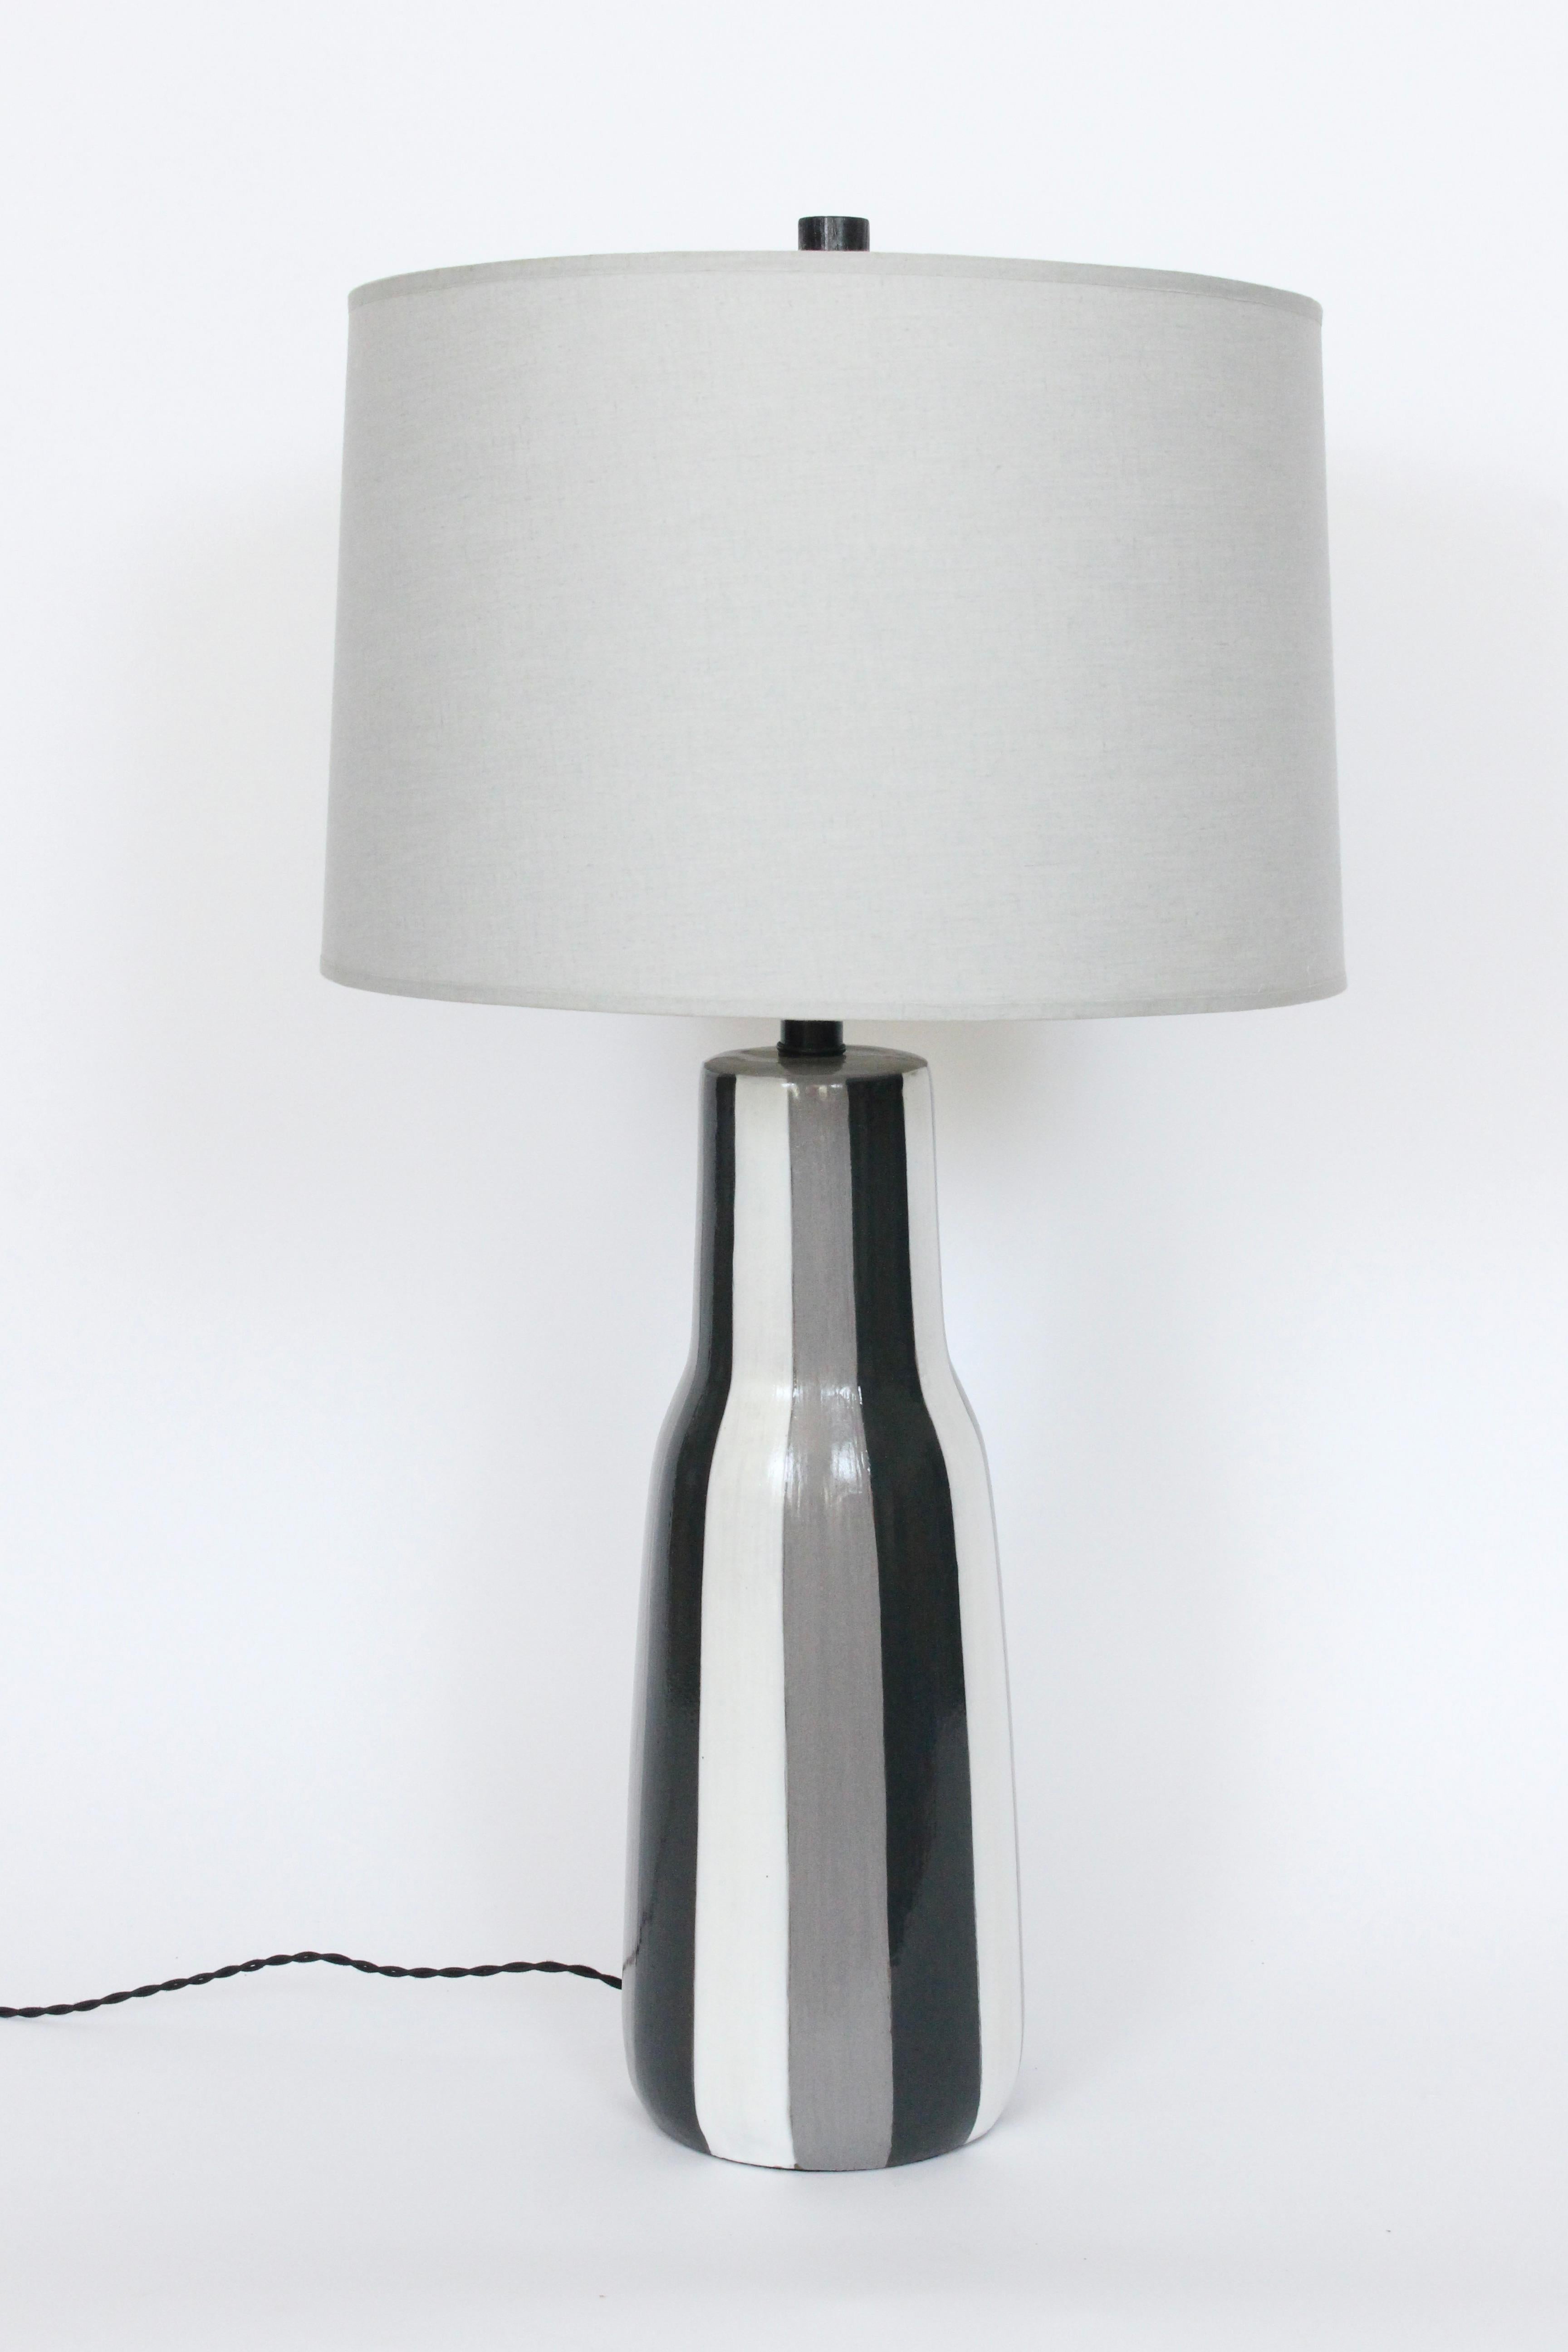 Monumental Design Technics handcrafted Glossy Glazed Pottery Table Lamp. Small footprint. Featuring an elongated bottle form with hand painted vertical striping in Gray, Black and White with original Black enameled wooden finial.  Shade shown for